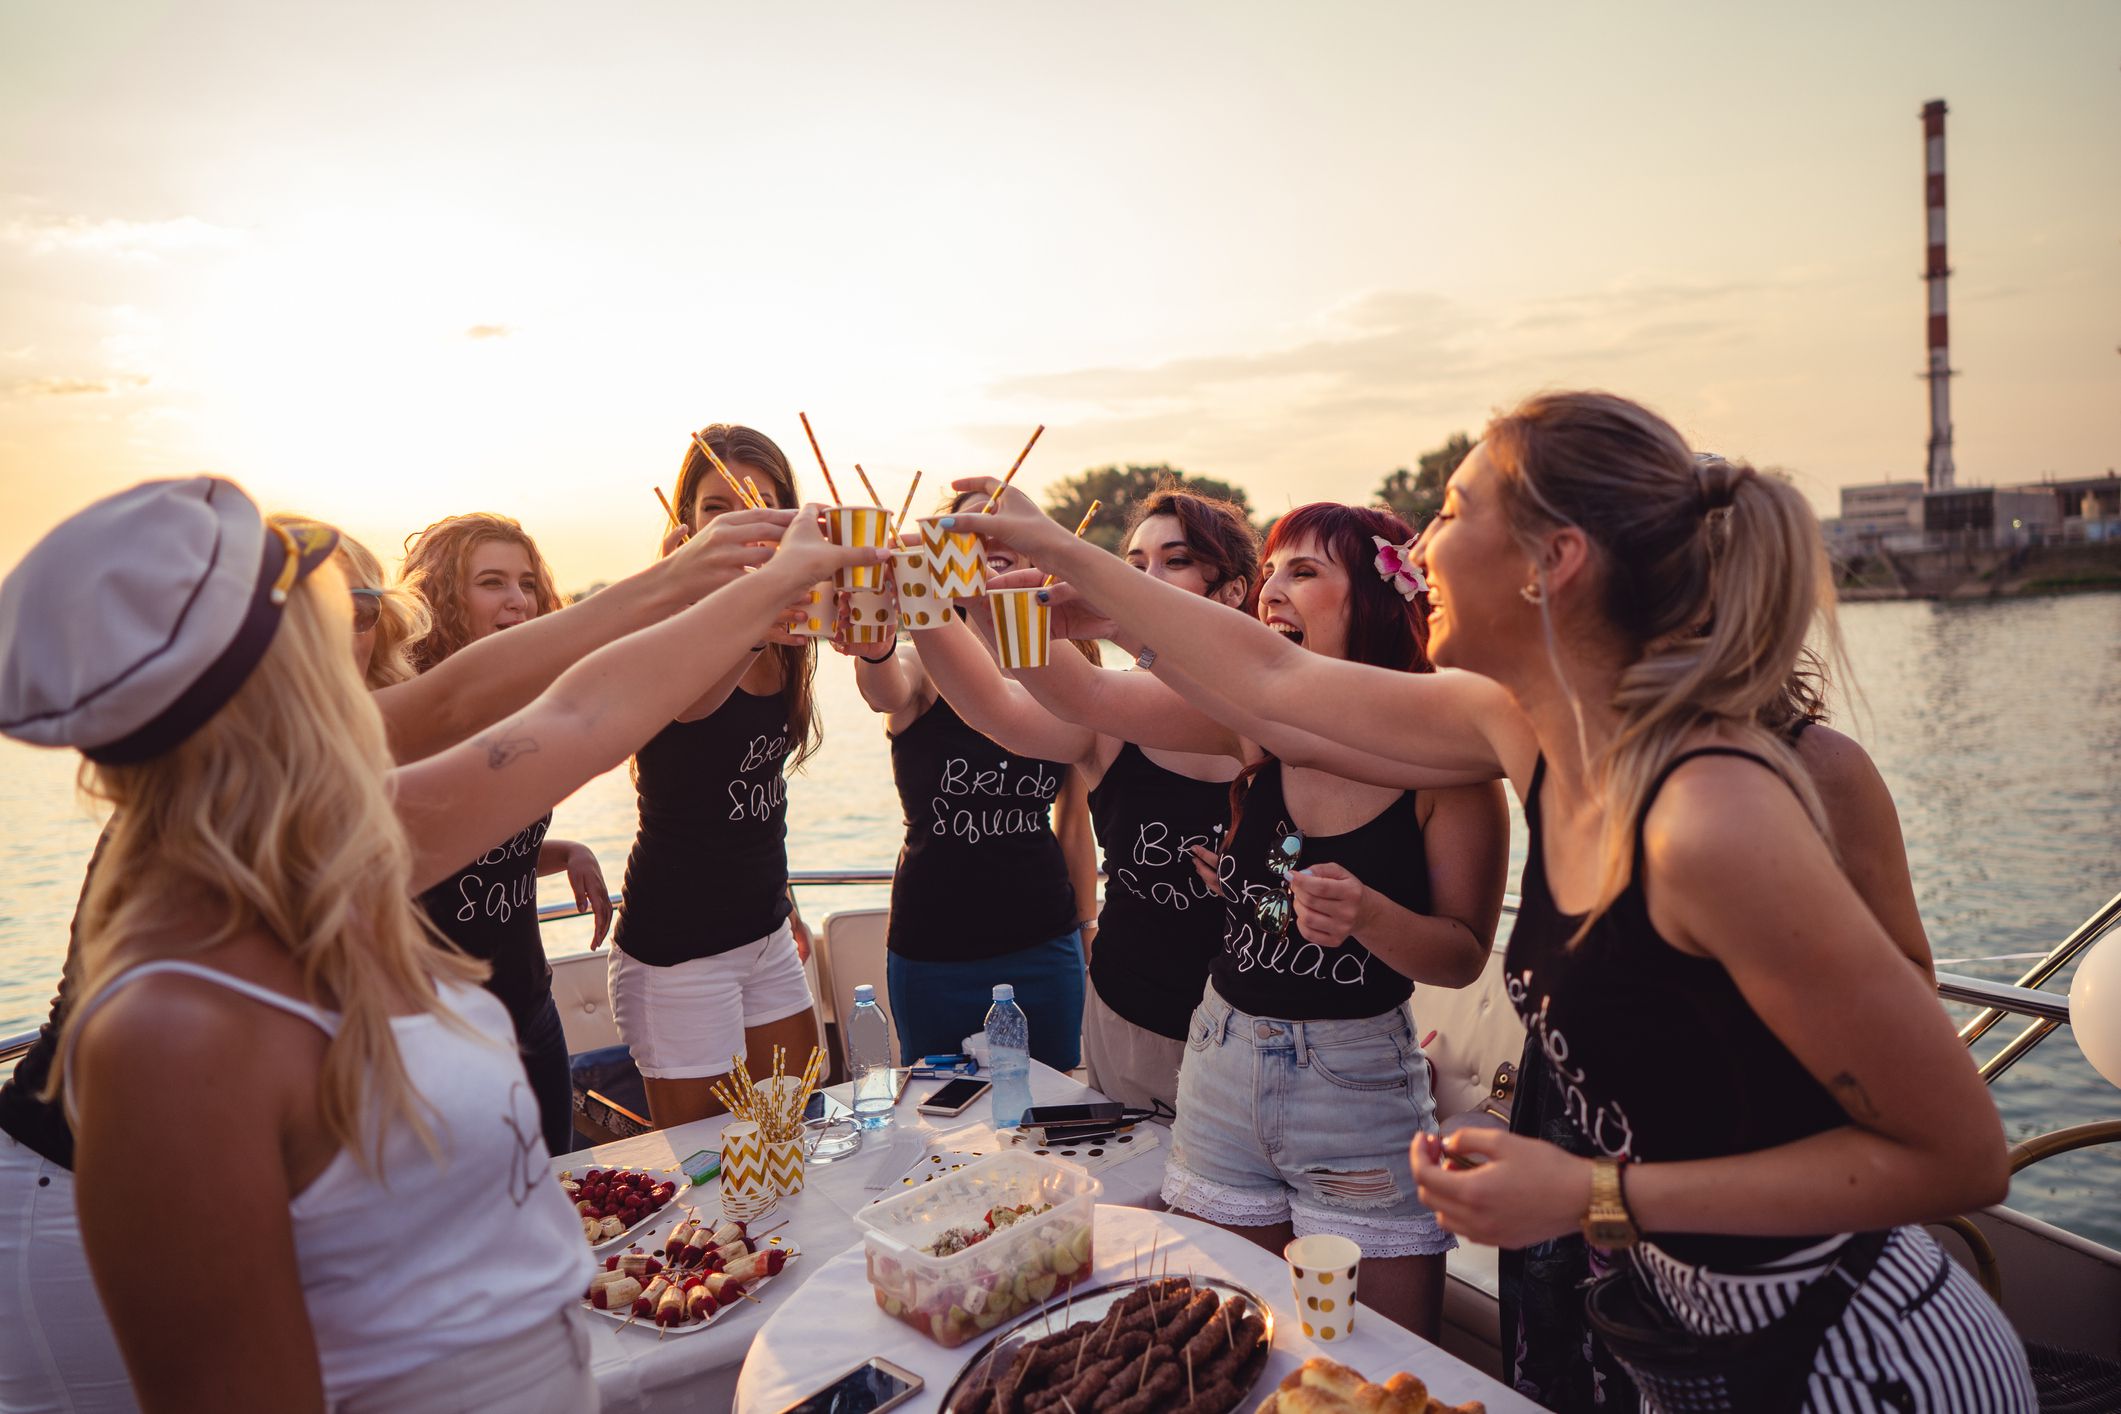 Catering Etiquette for a Girls' Night In